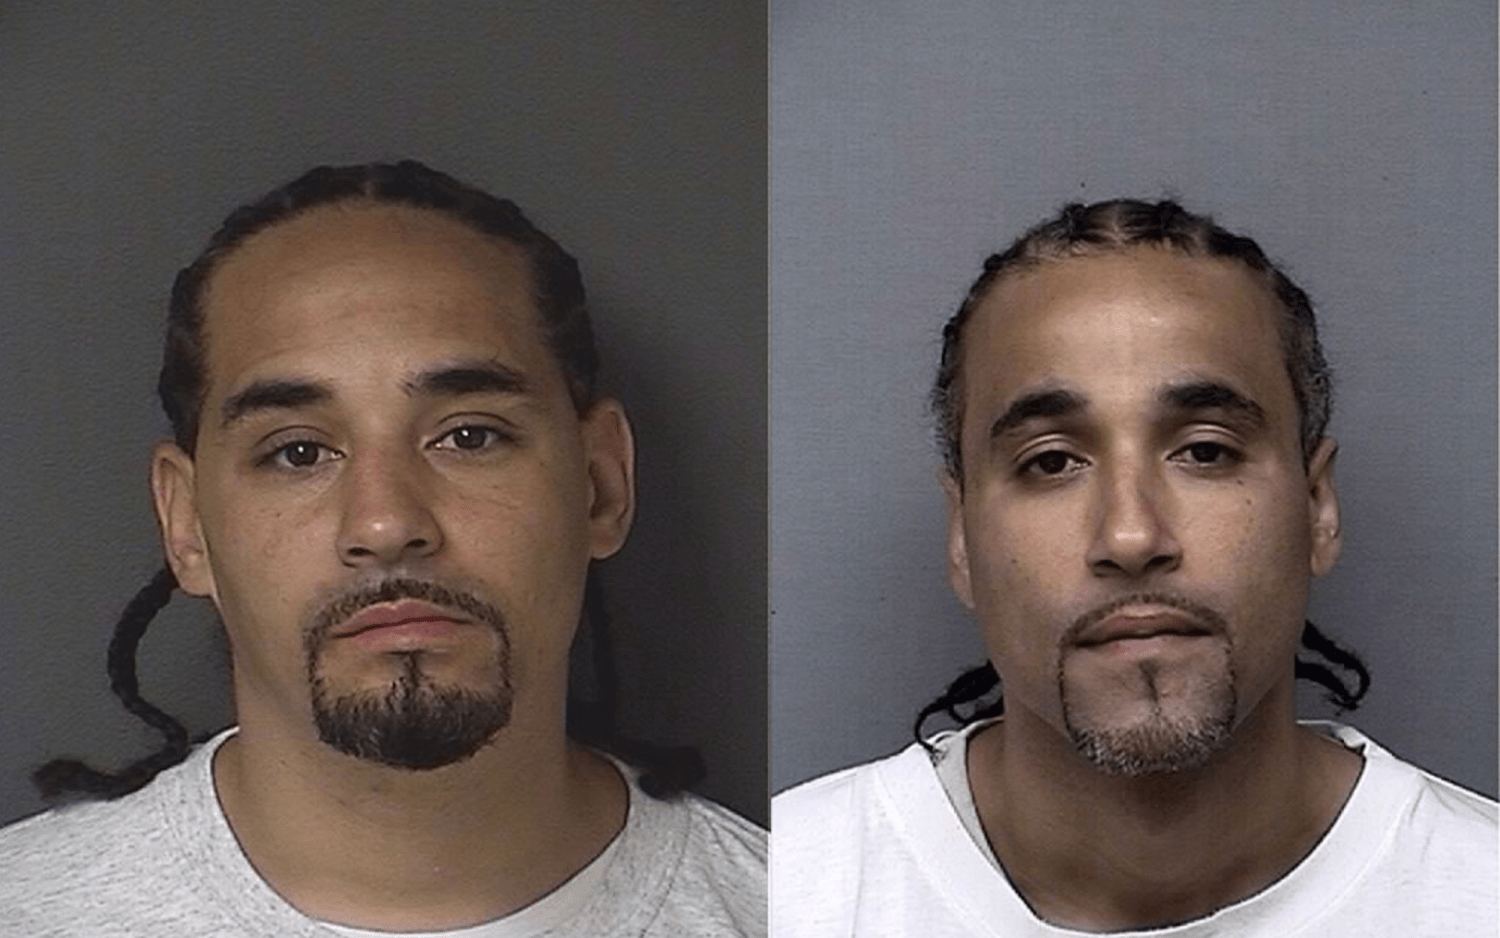 Kansas Inmate Freed After Doppelganger Found 17 Years Later pic